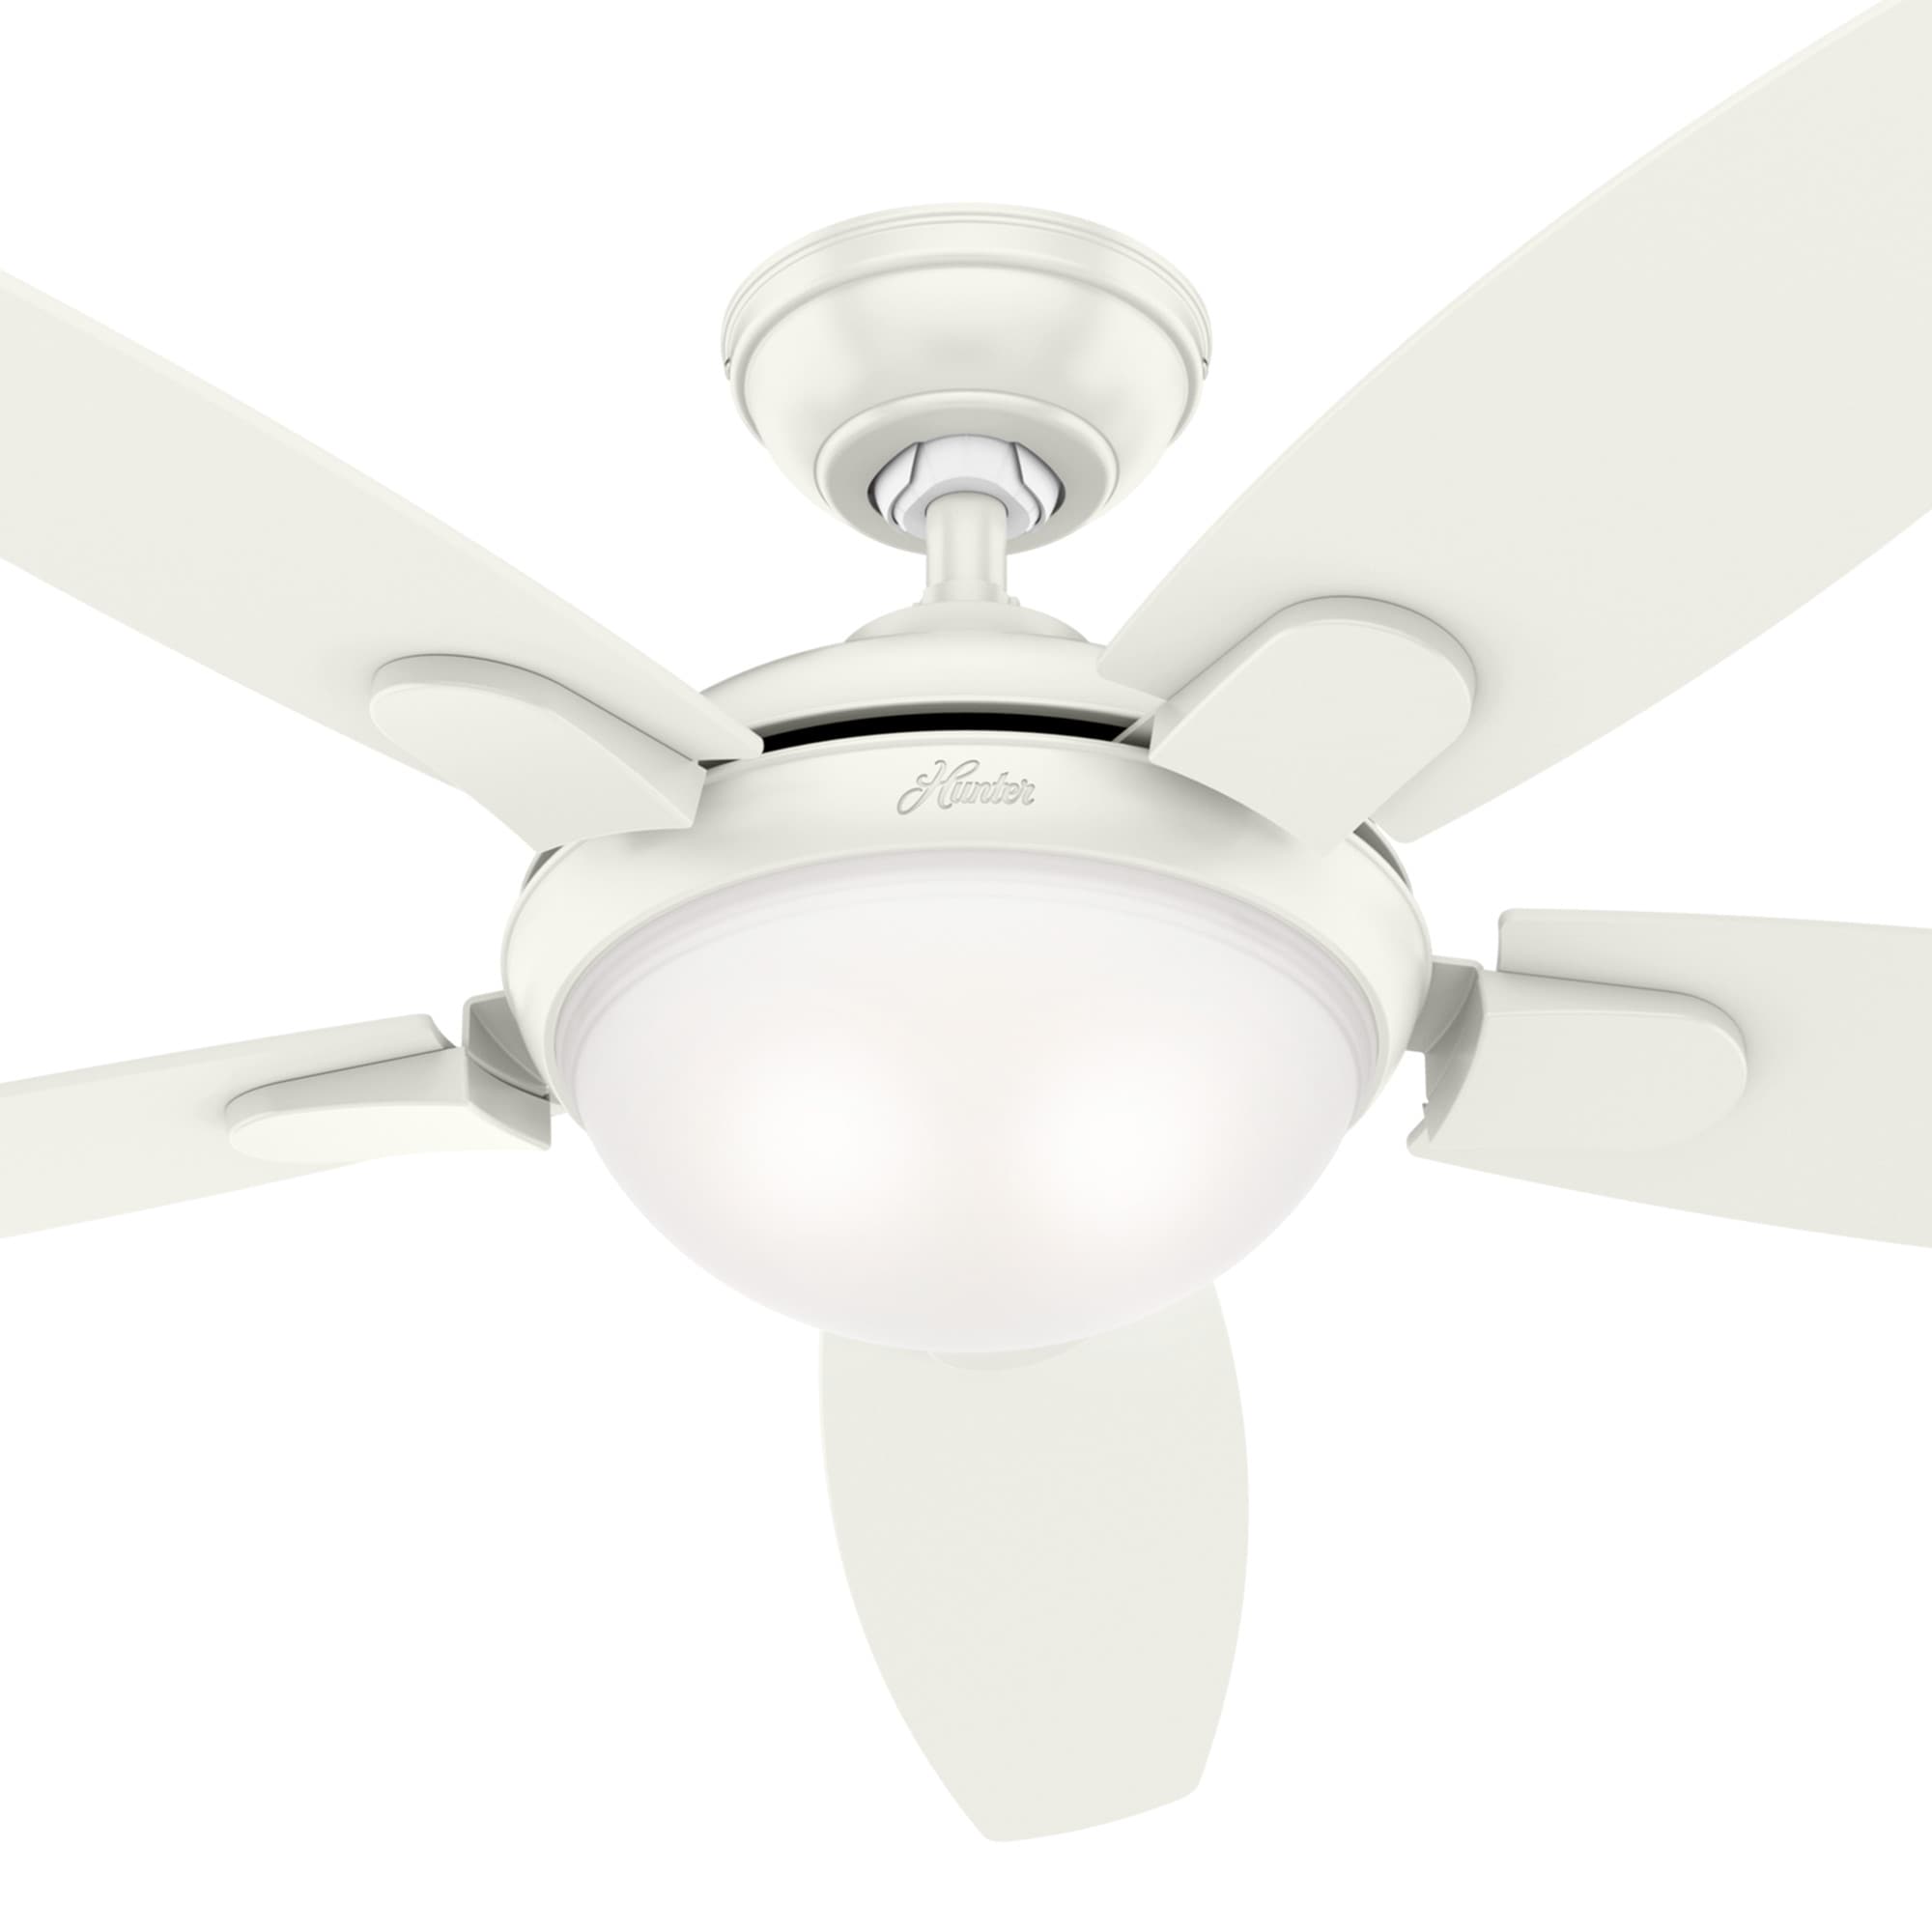 54" Contempo II Hunter Ceiling Fan #59477 Fresh White Finish New PARTS ONLY 